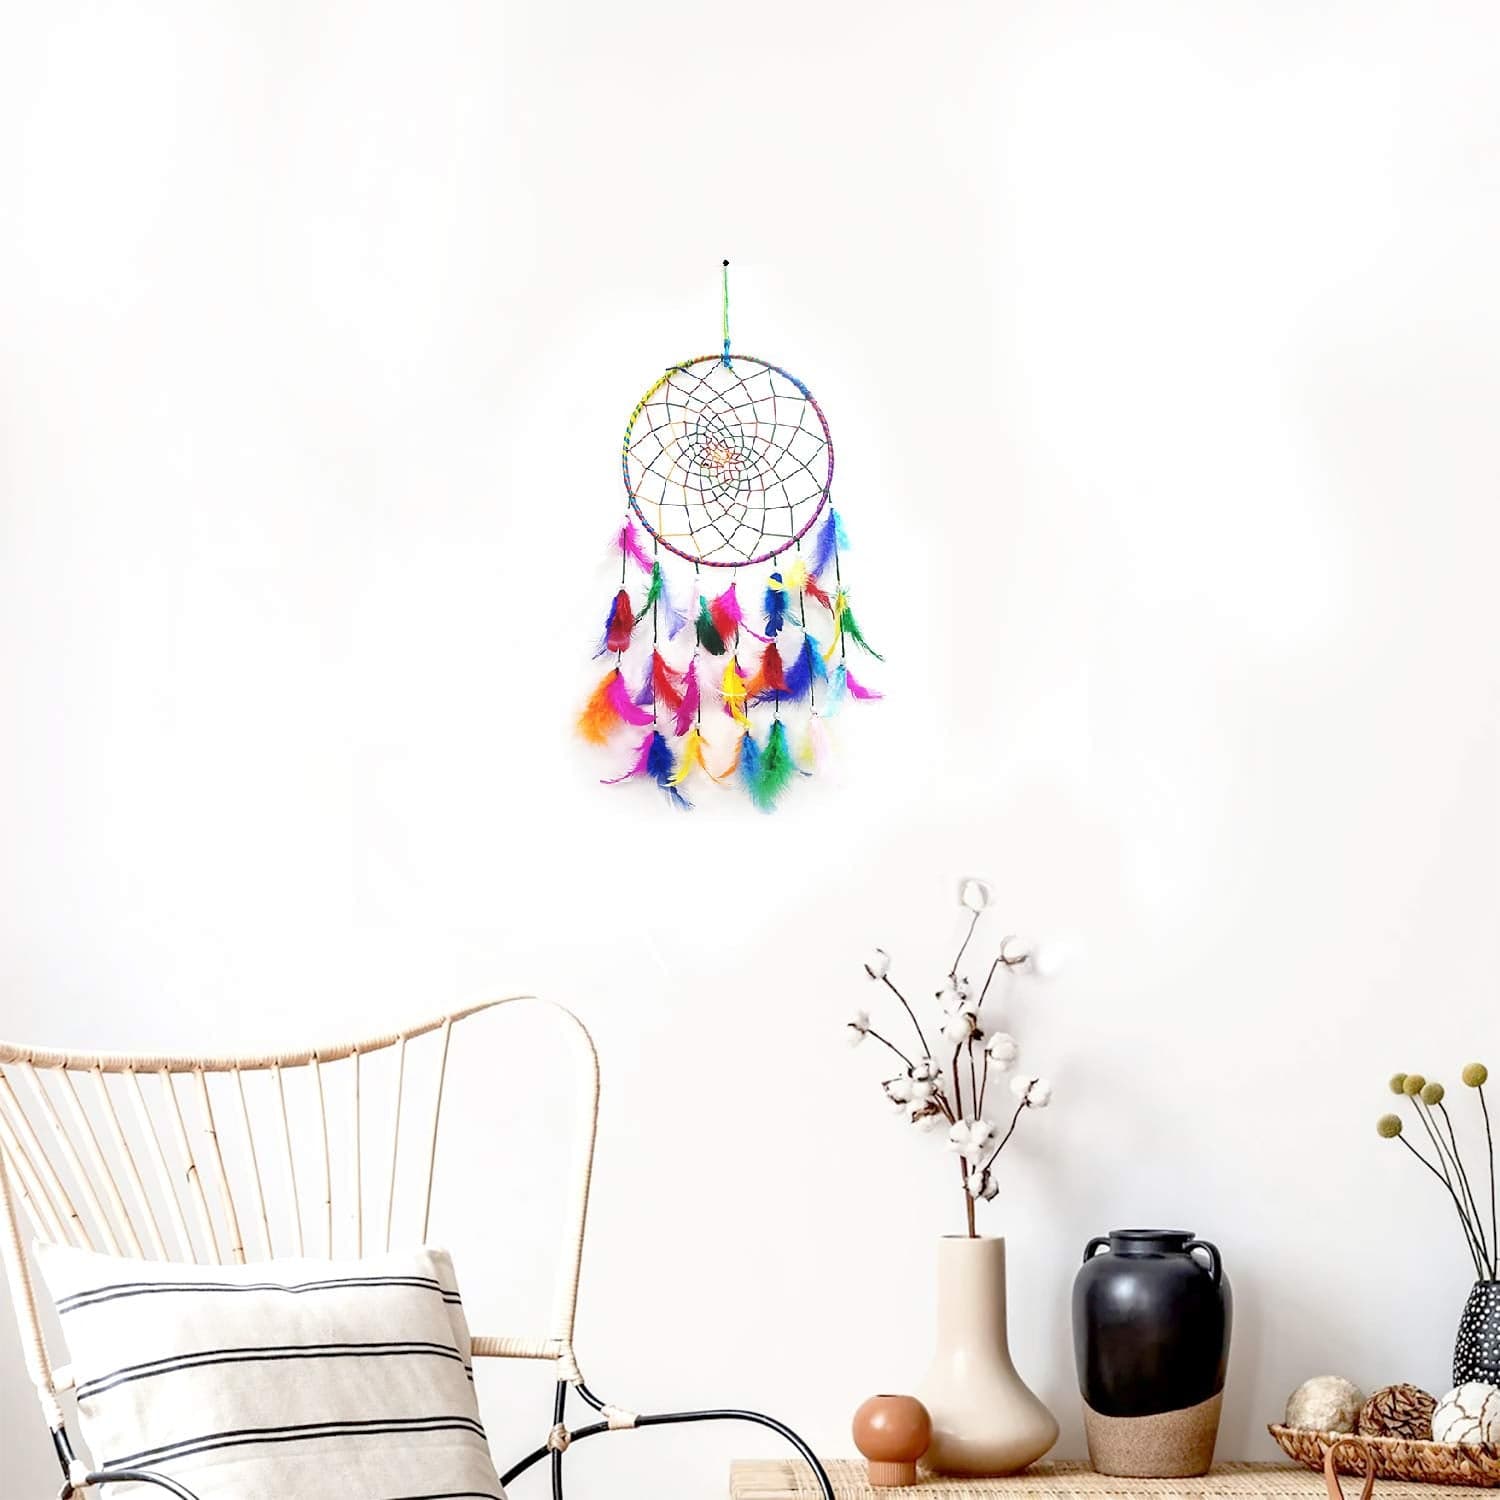 Buy Dream Catcher Handmade Wall Hanging at Best Price in India